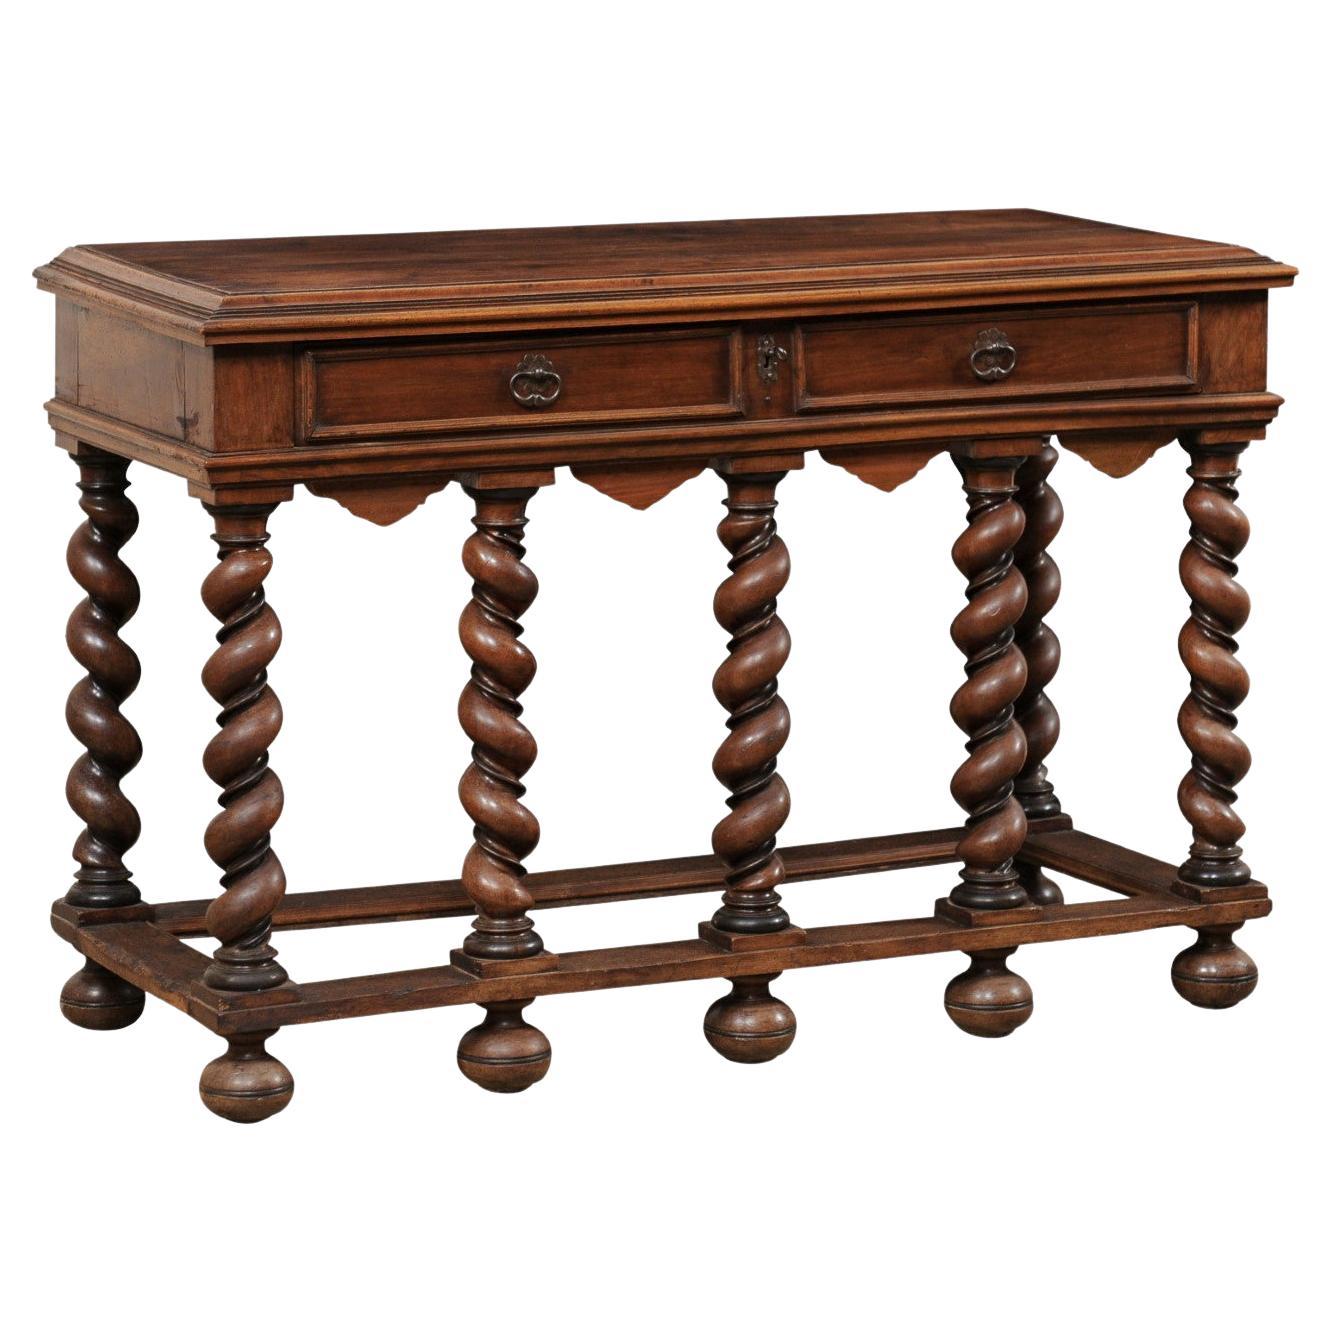 Antique English Console Table Beautifully Presented on Robust Barely Twist Legs